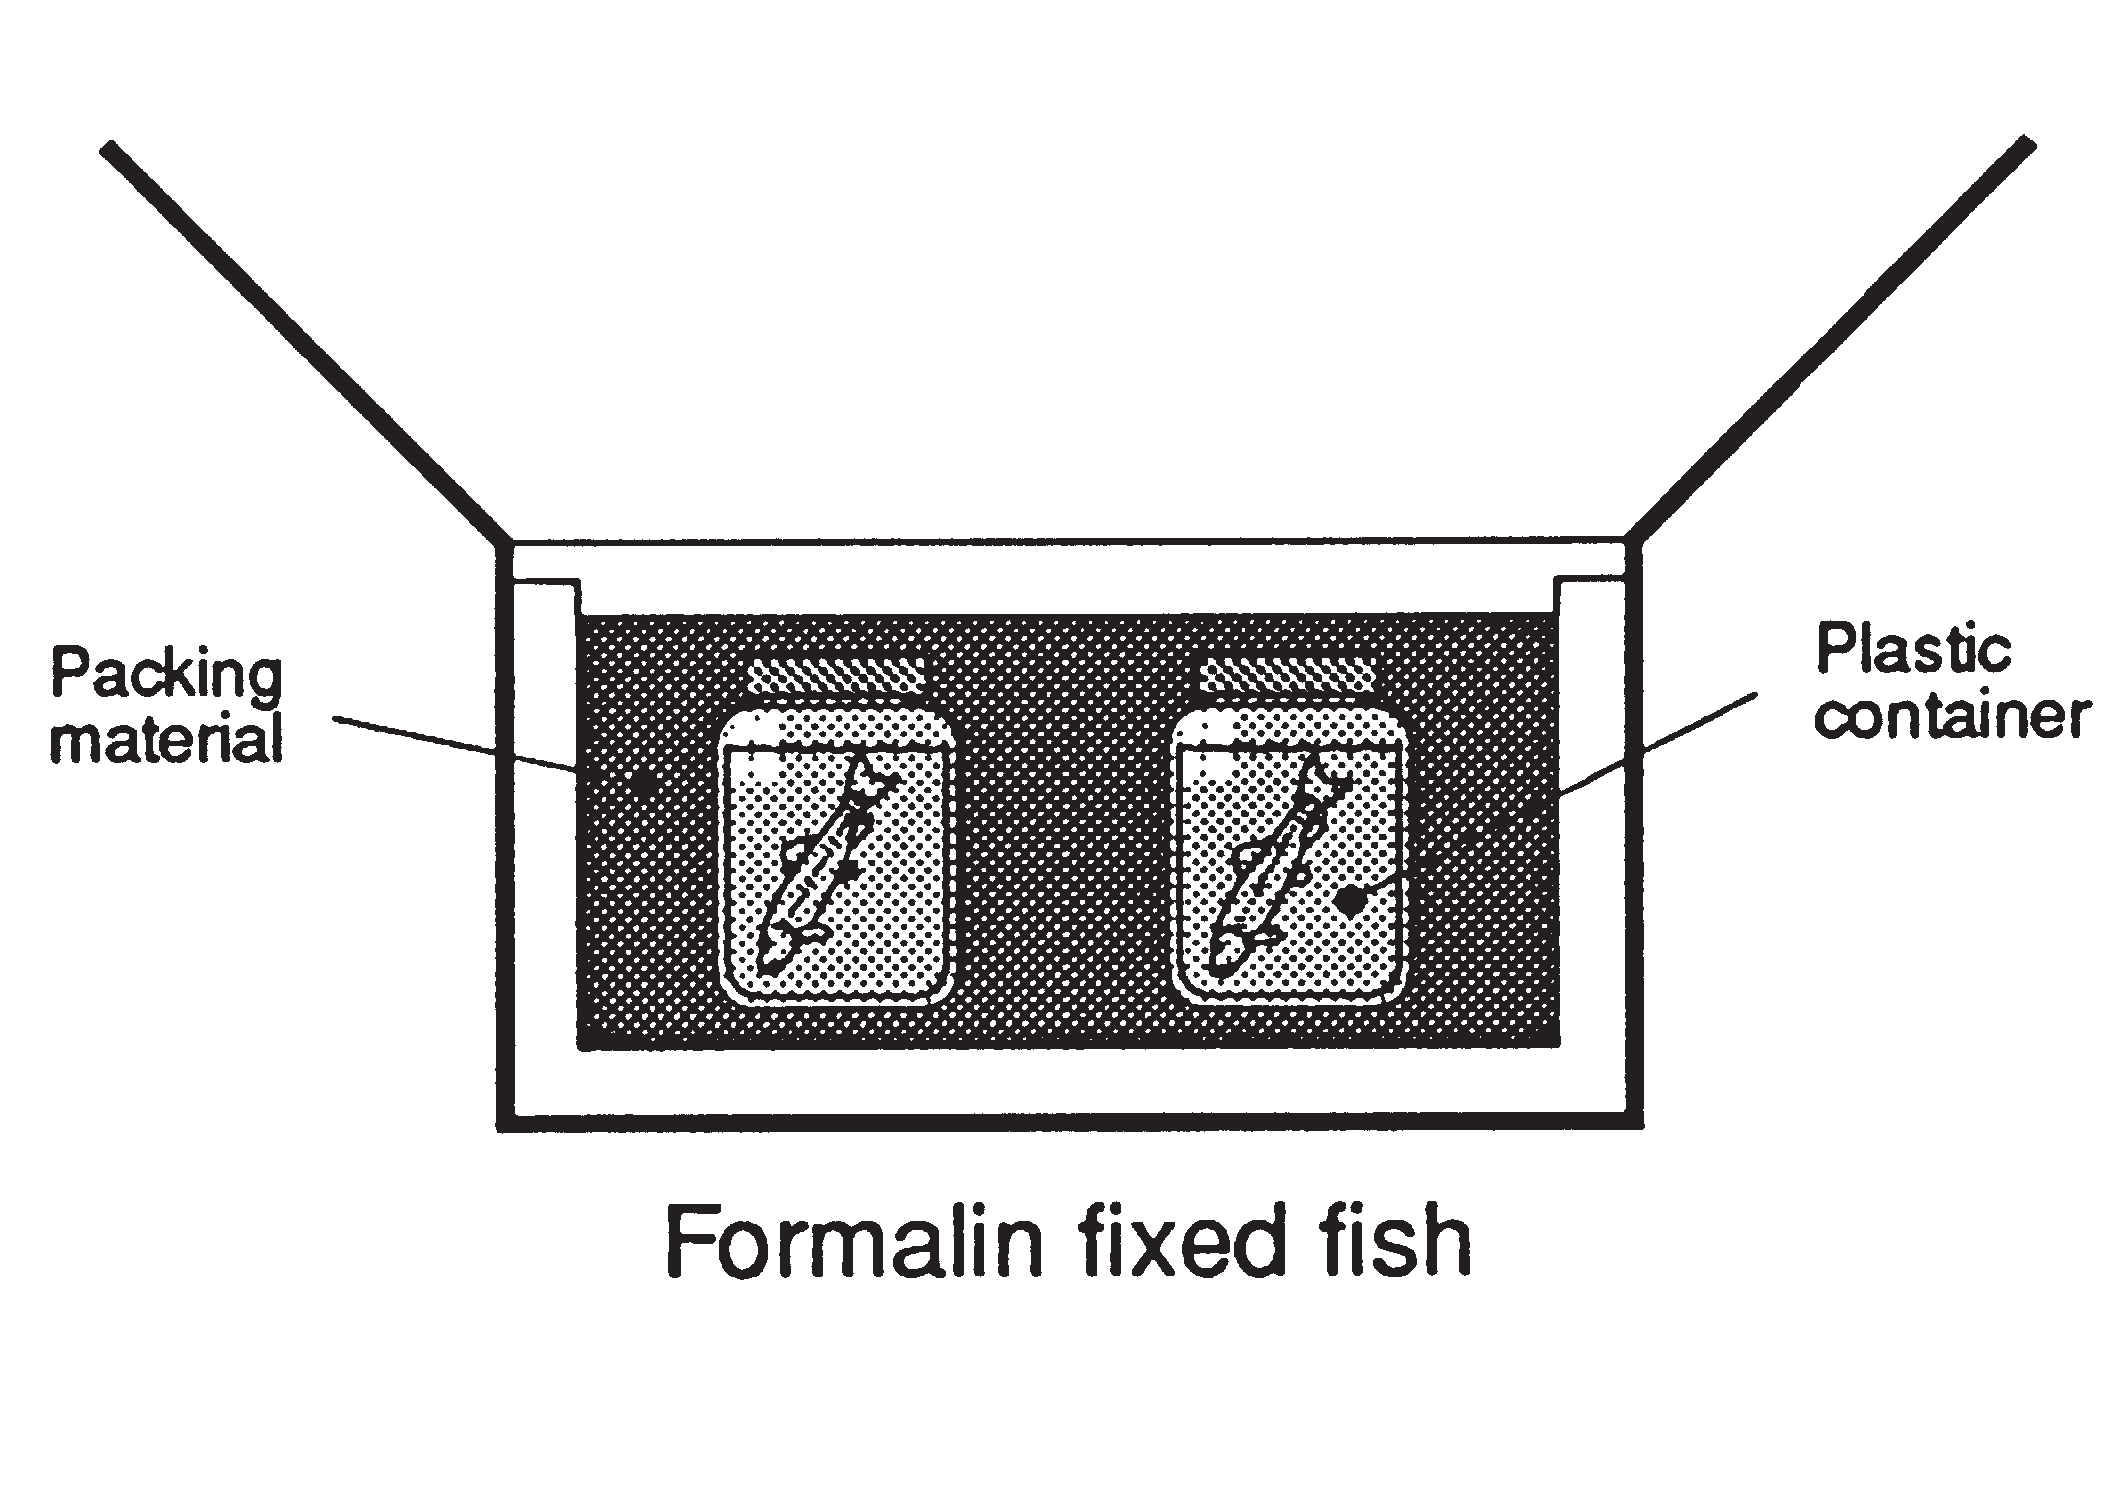 diagram on how to package fish in formalin